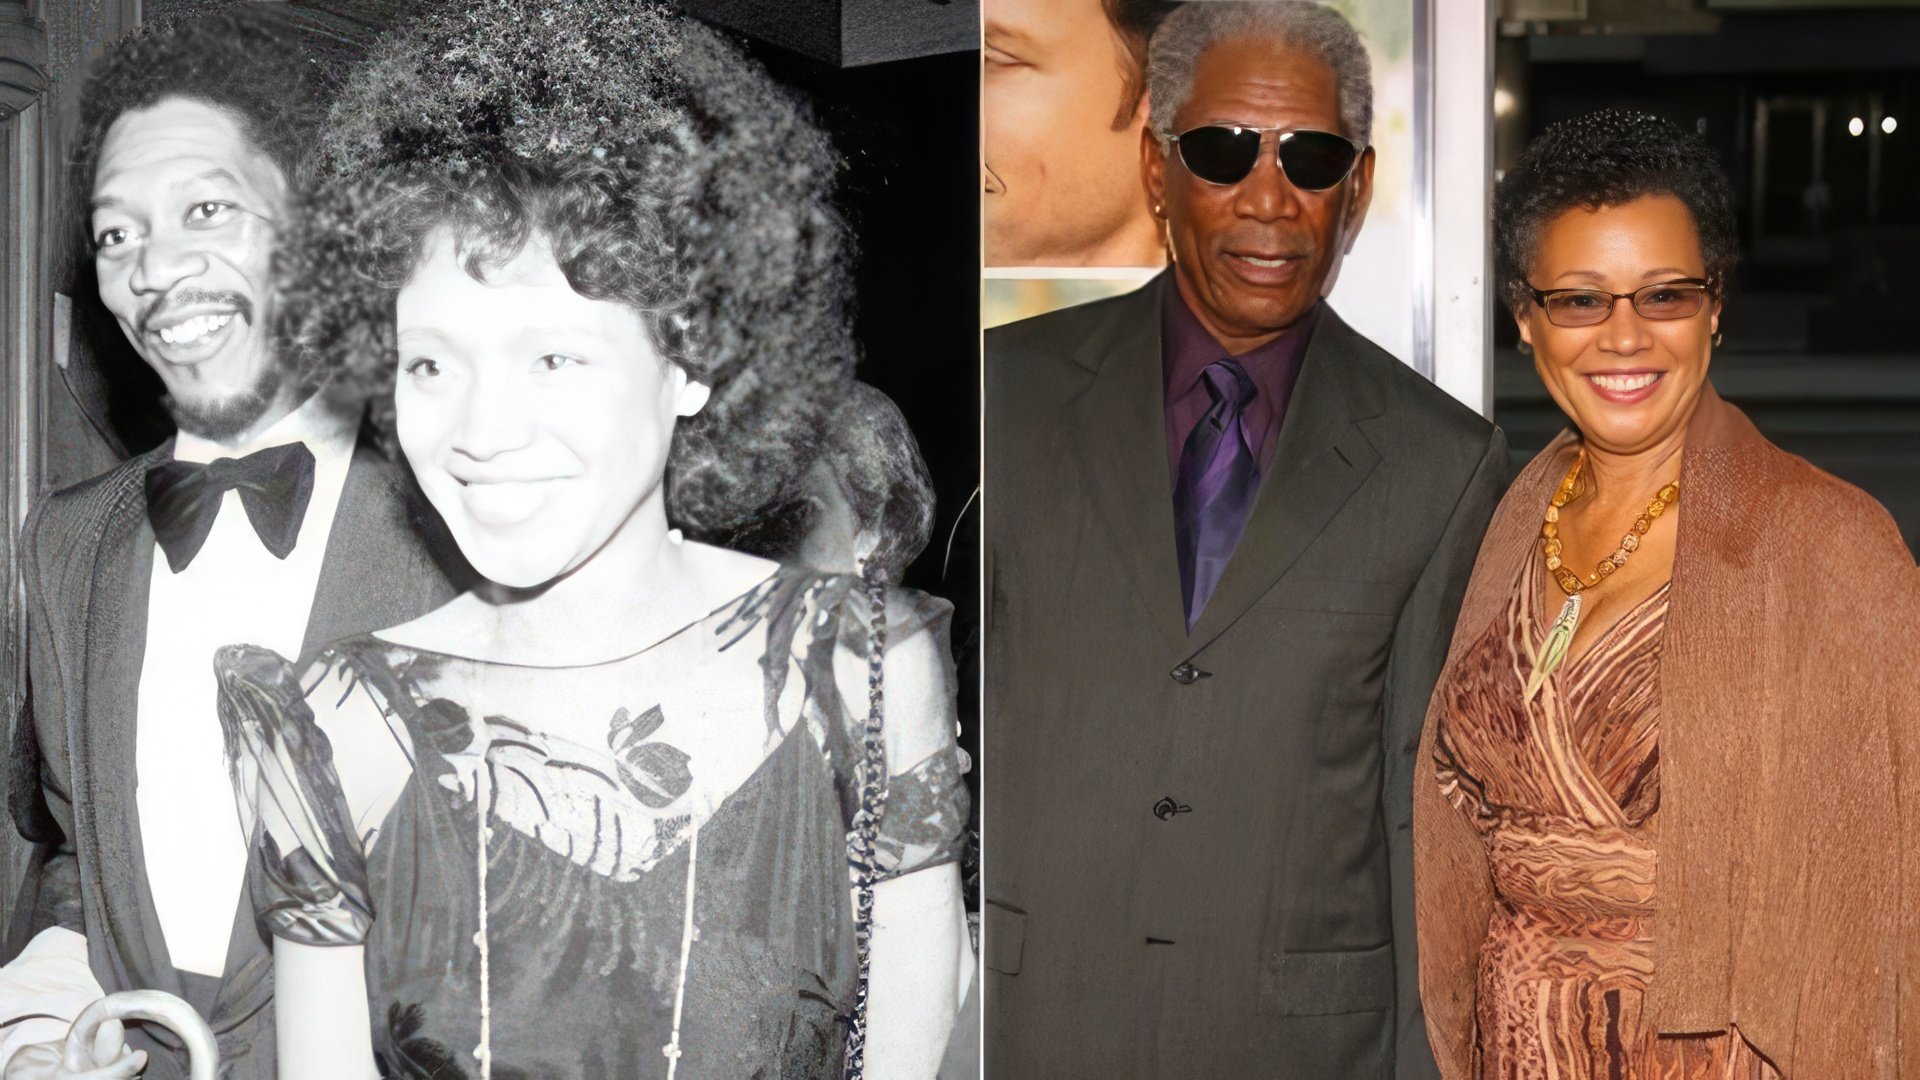 Morgan Freeman and his wives Jeanette and Myrna (from the right)